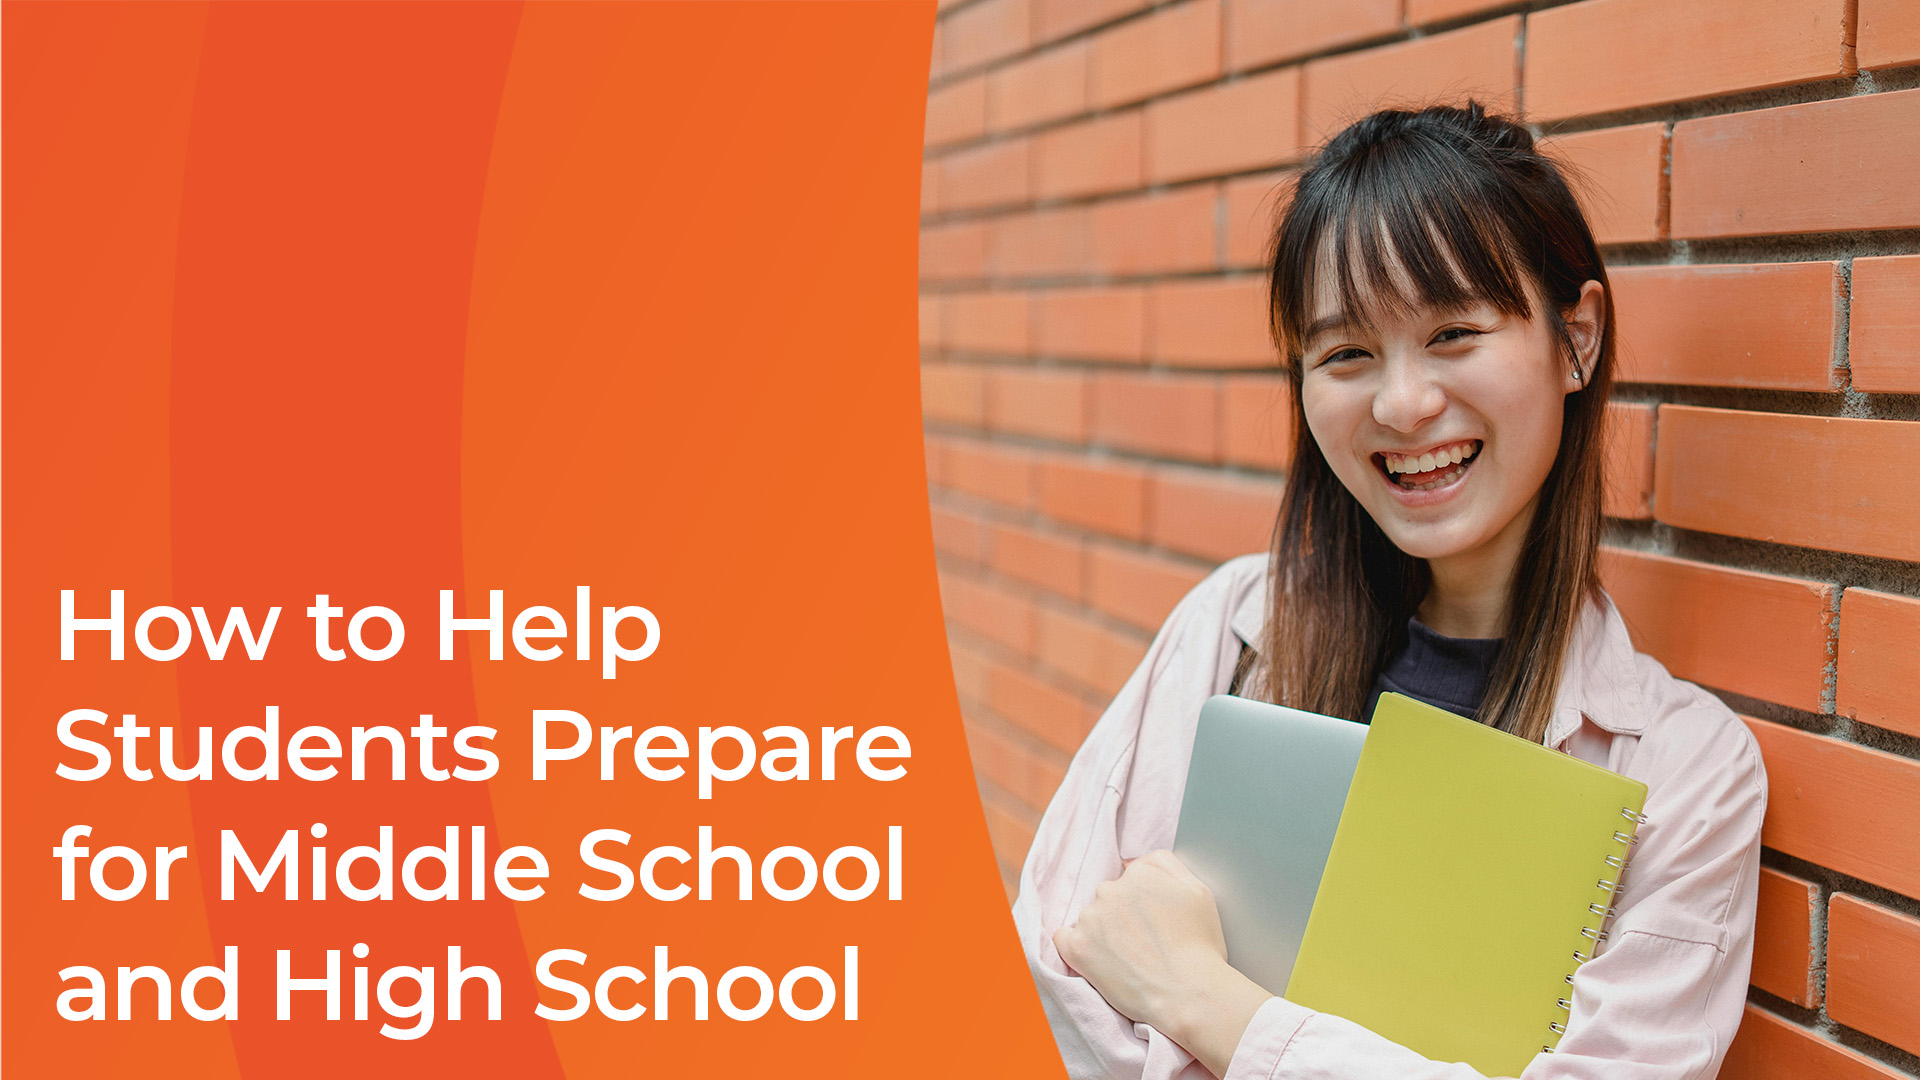 How to Help Students Prepare for Middle School and High School